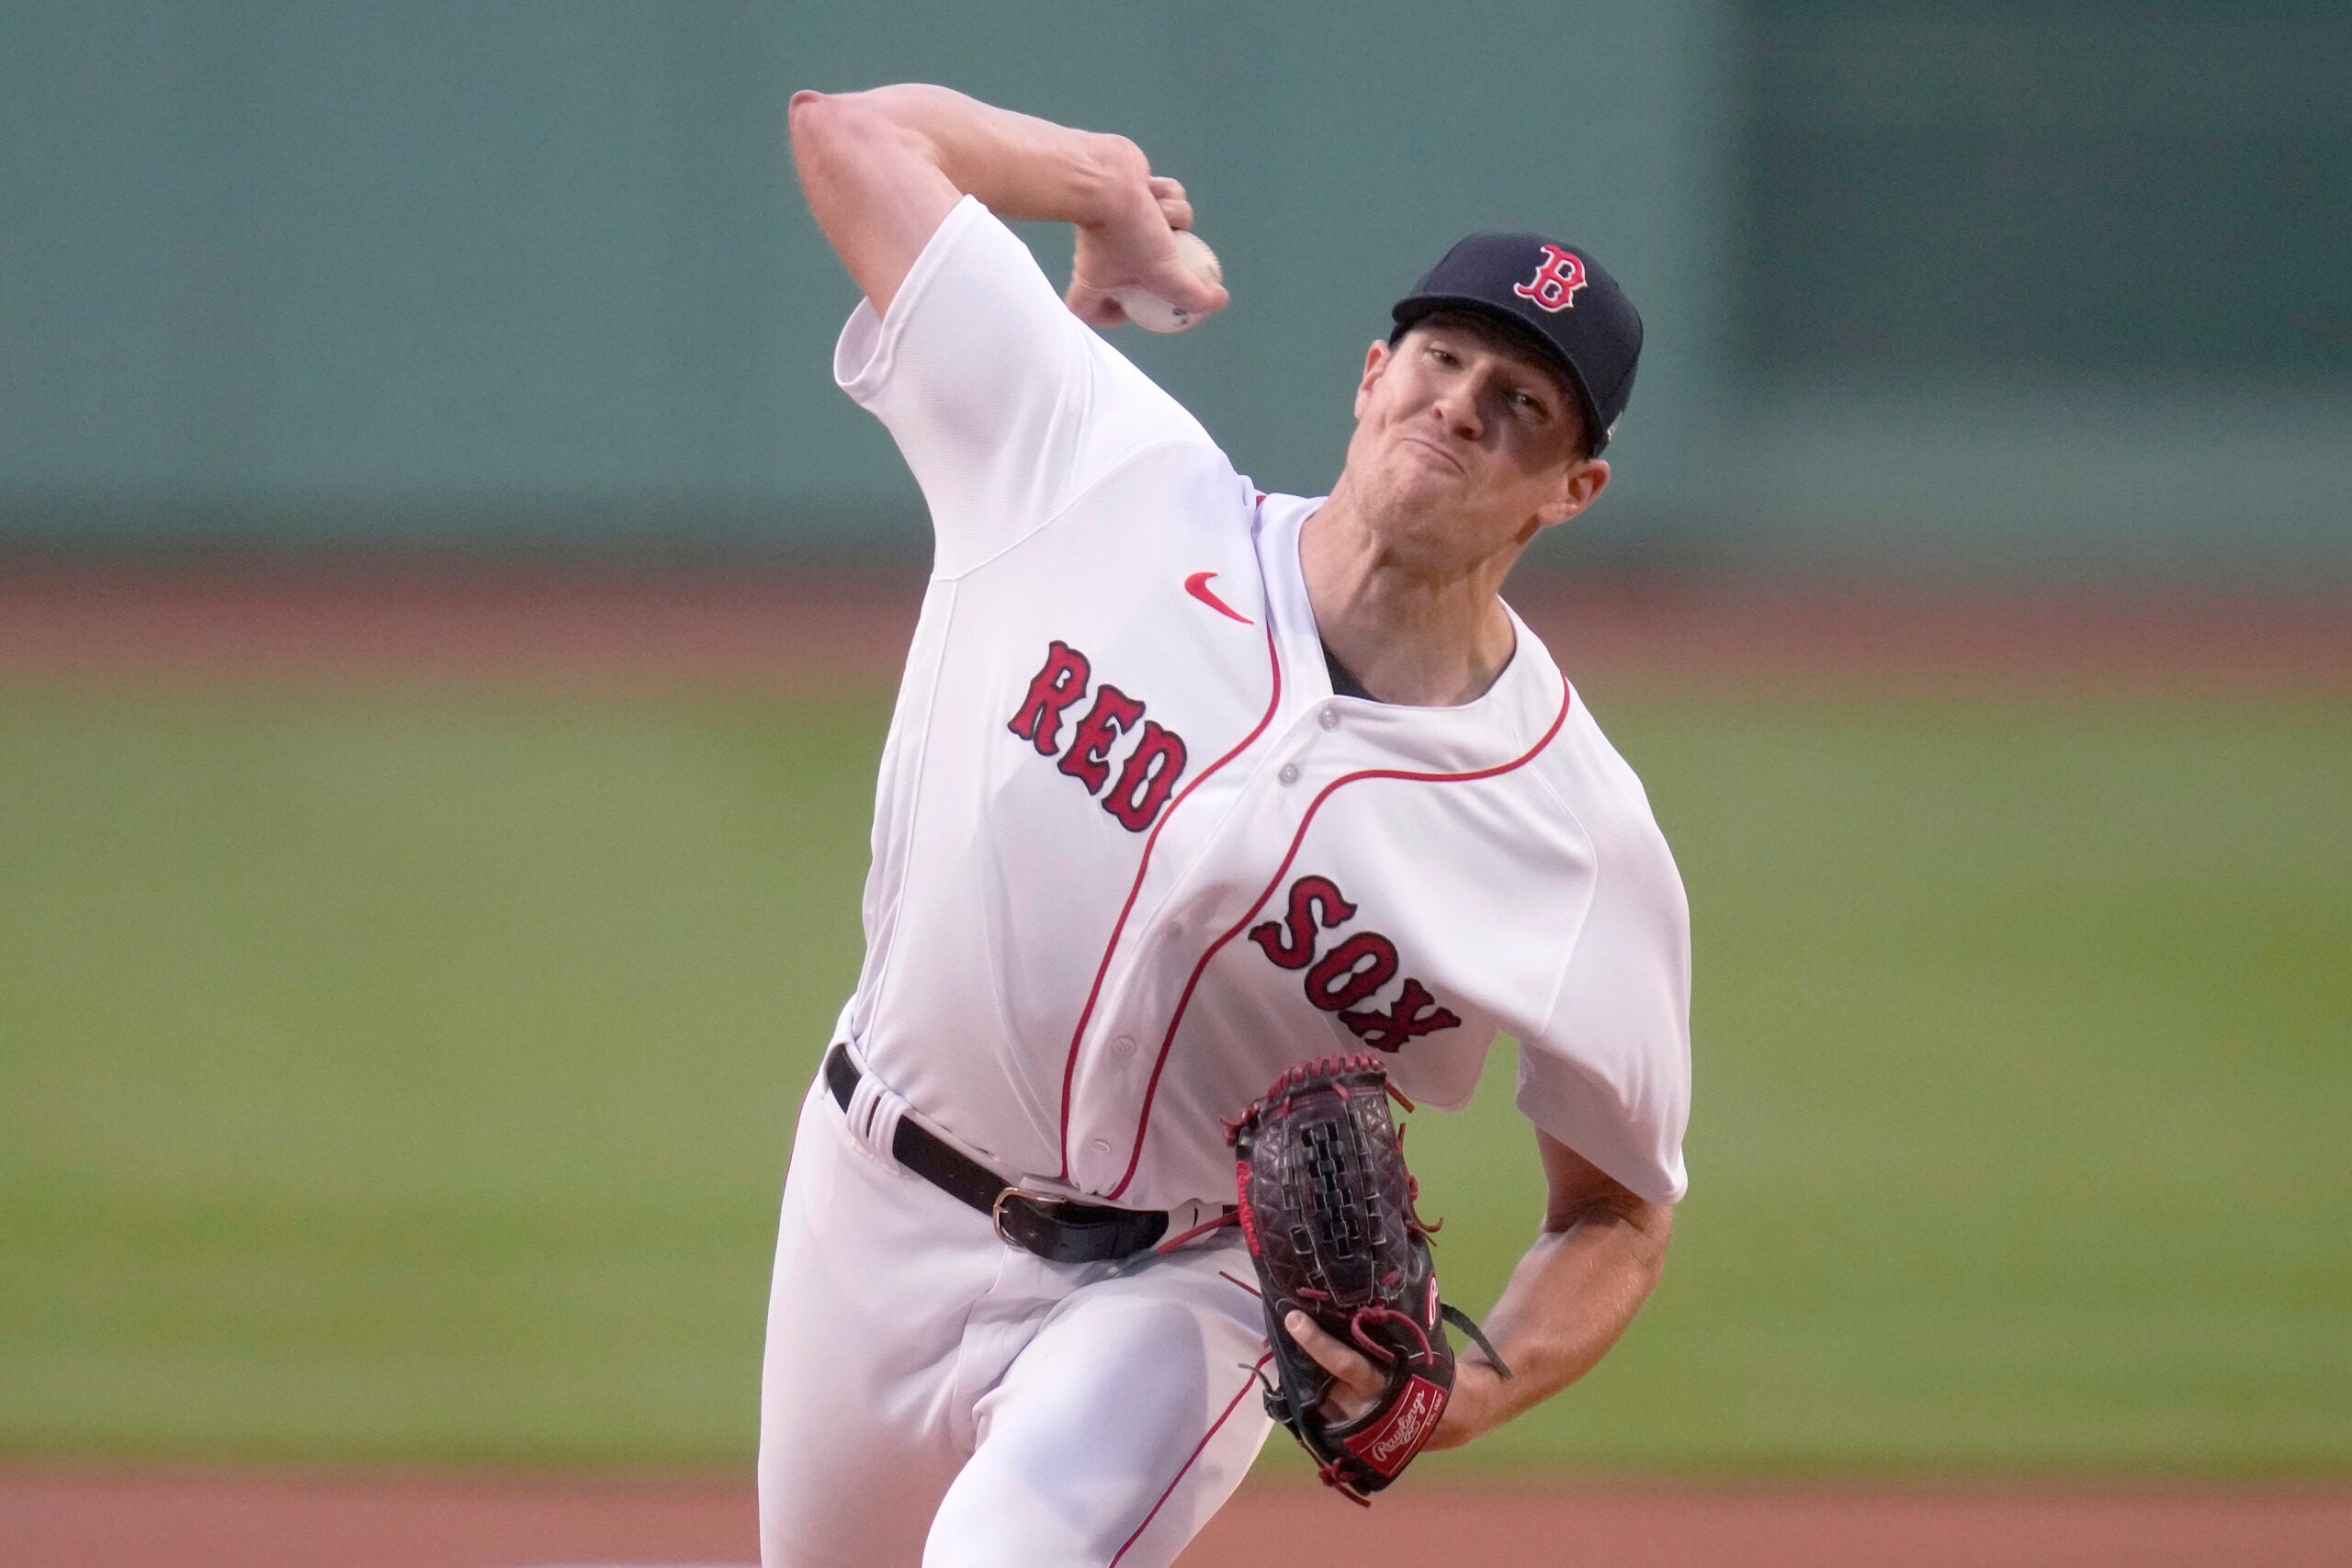 Boston Red Sox starting pitcher Nick Pivetta delivers against the Seattle Mariner.